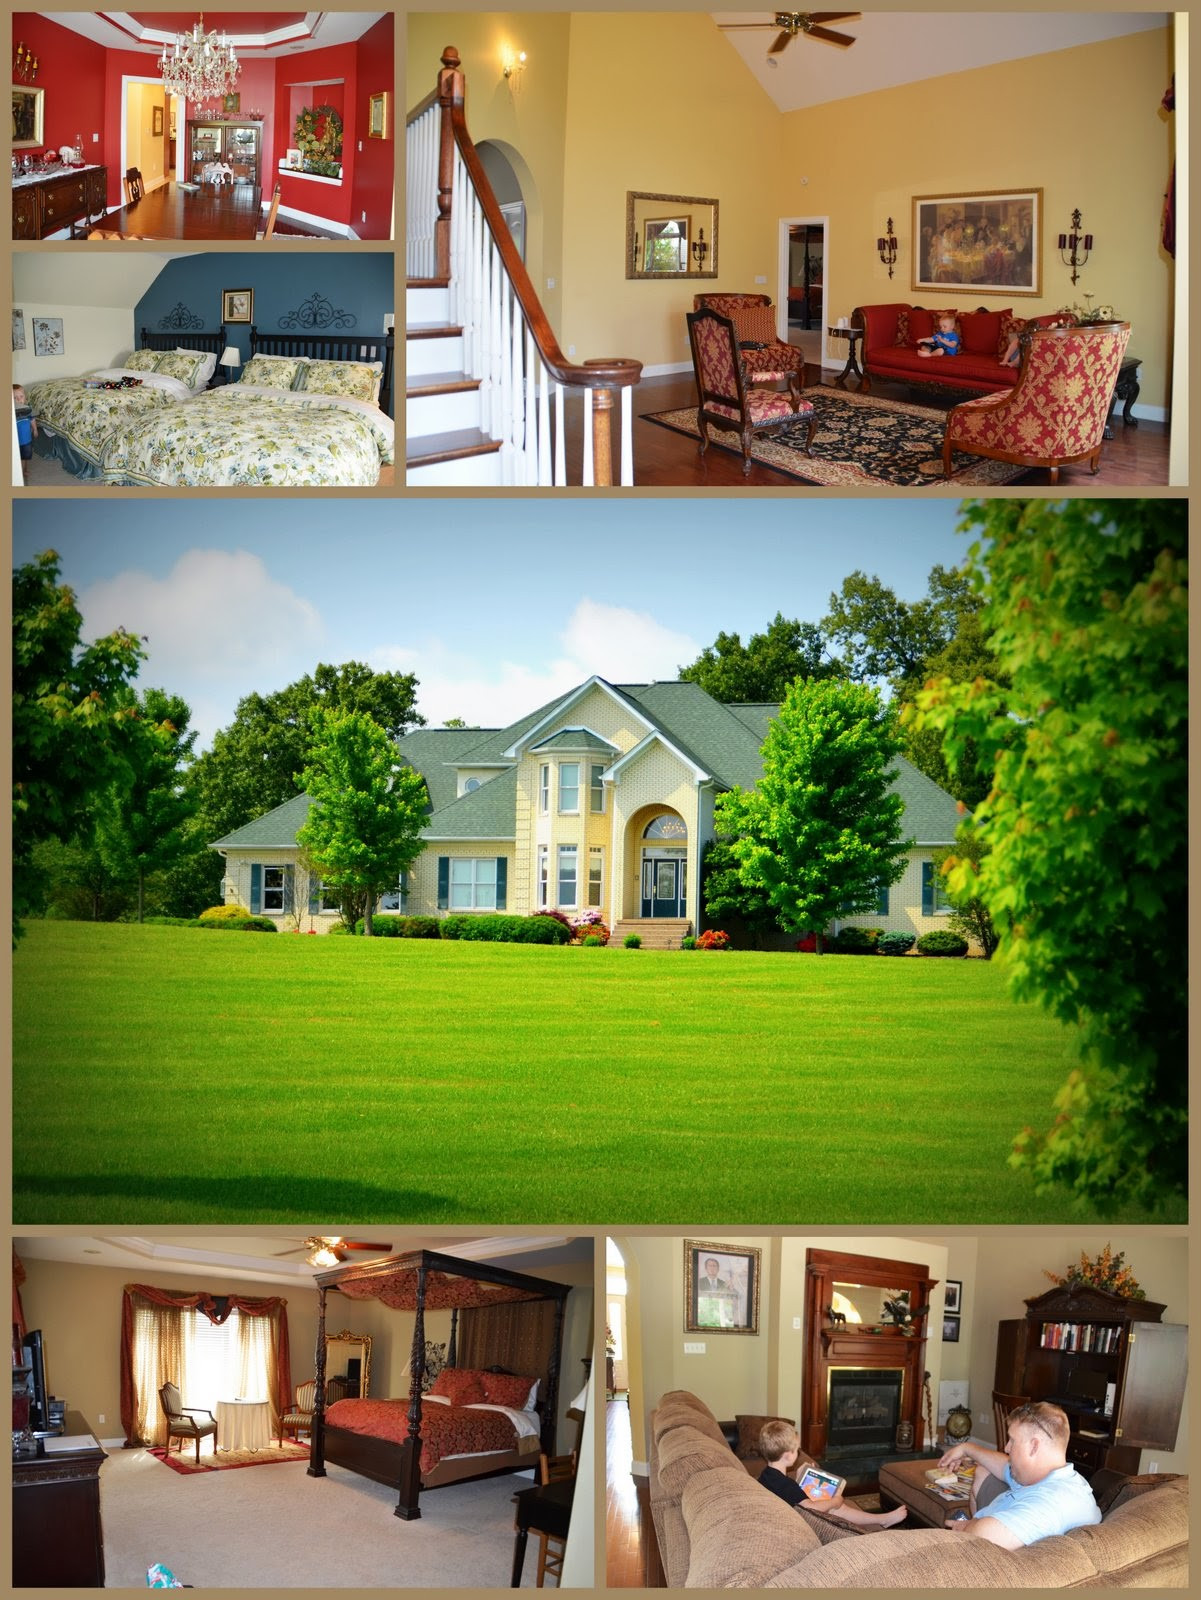 Southern Grace Bed And Breakfast
 We Are The Banes Southern Grace Bed & Breakfast